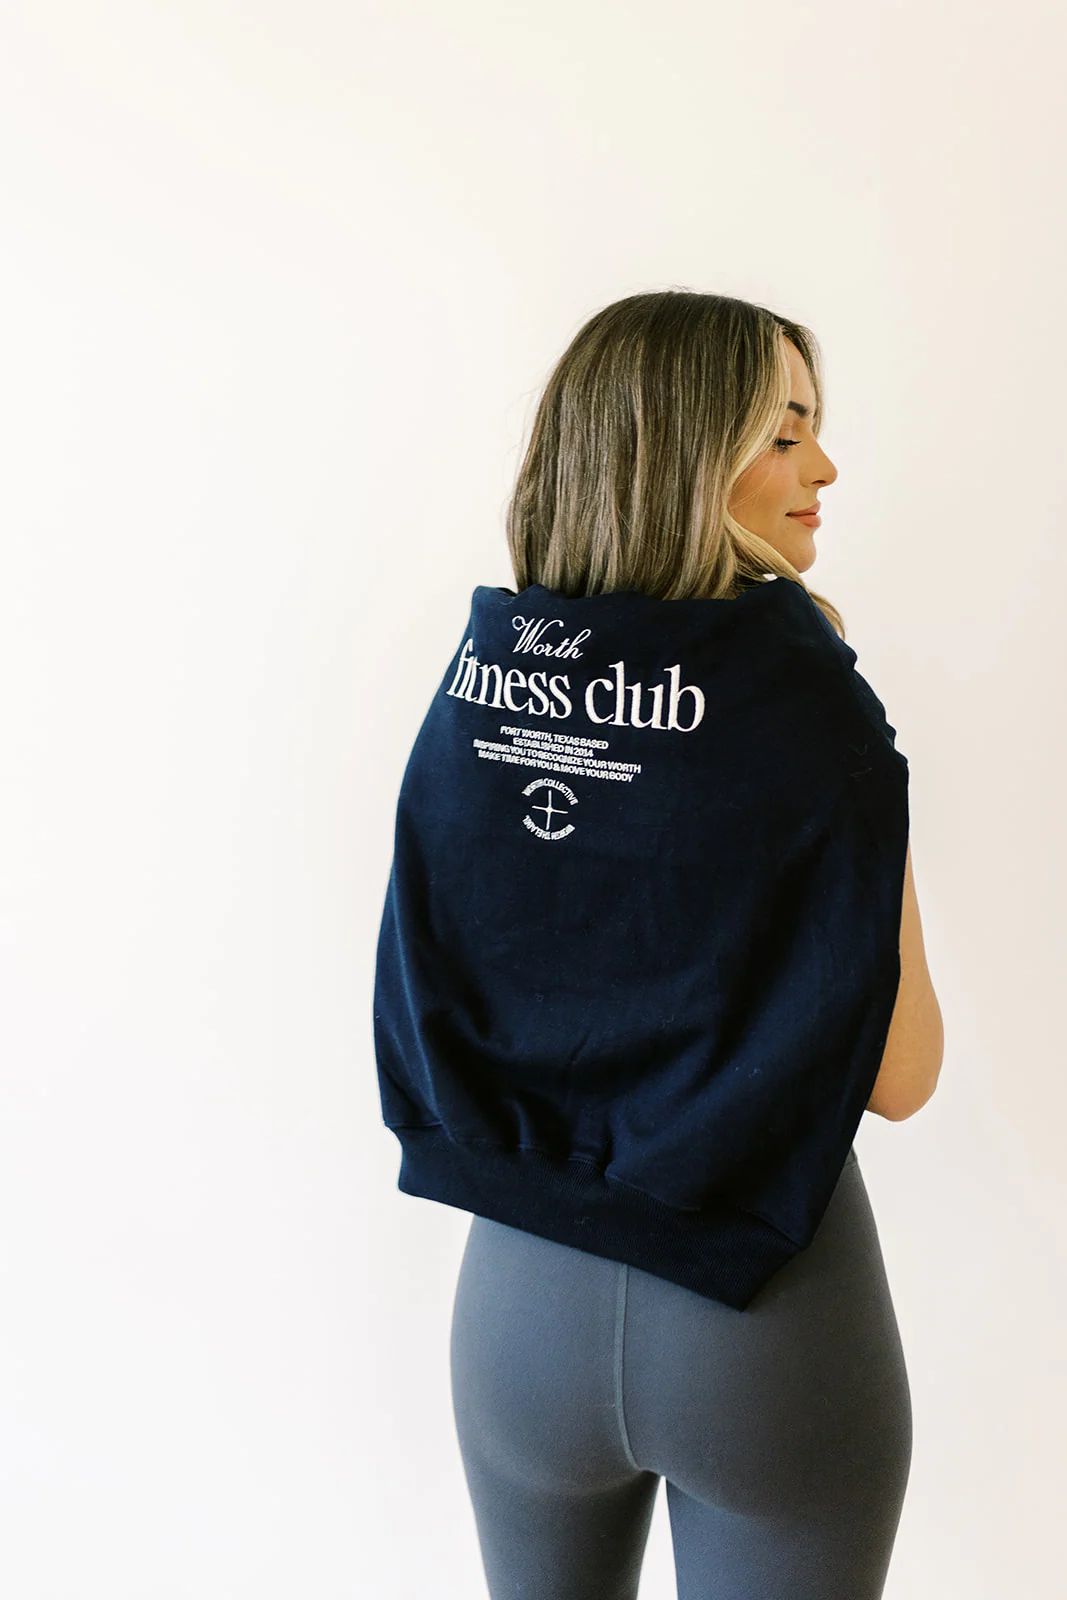 Worth Fitness Club Crewneck in Navy or Heather Grey | Worth Collective